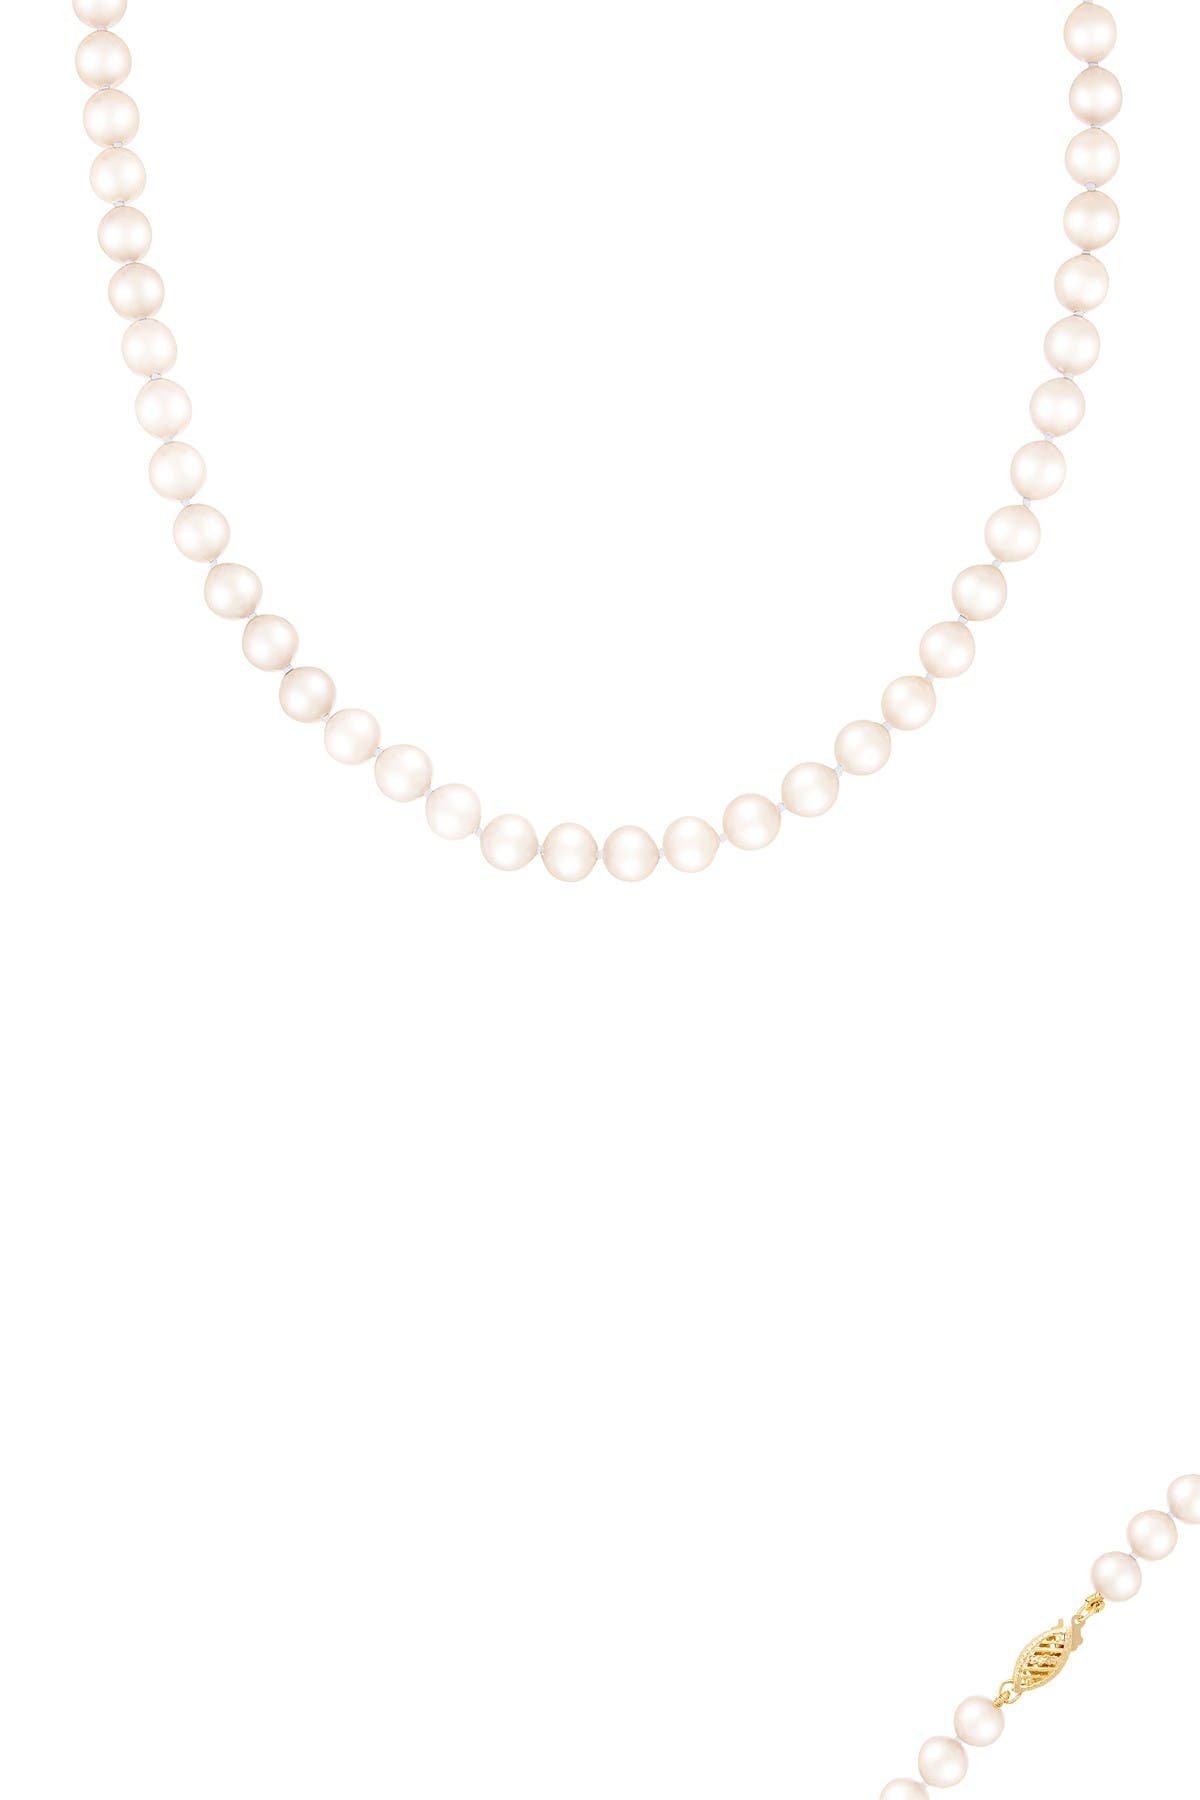 Splendid Pearls 14k Gold Plated 7-7.5mm Freshwater Pearl Necklace & Bracelet 2-piece Set In Natural White